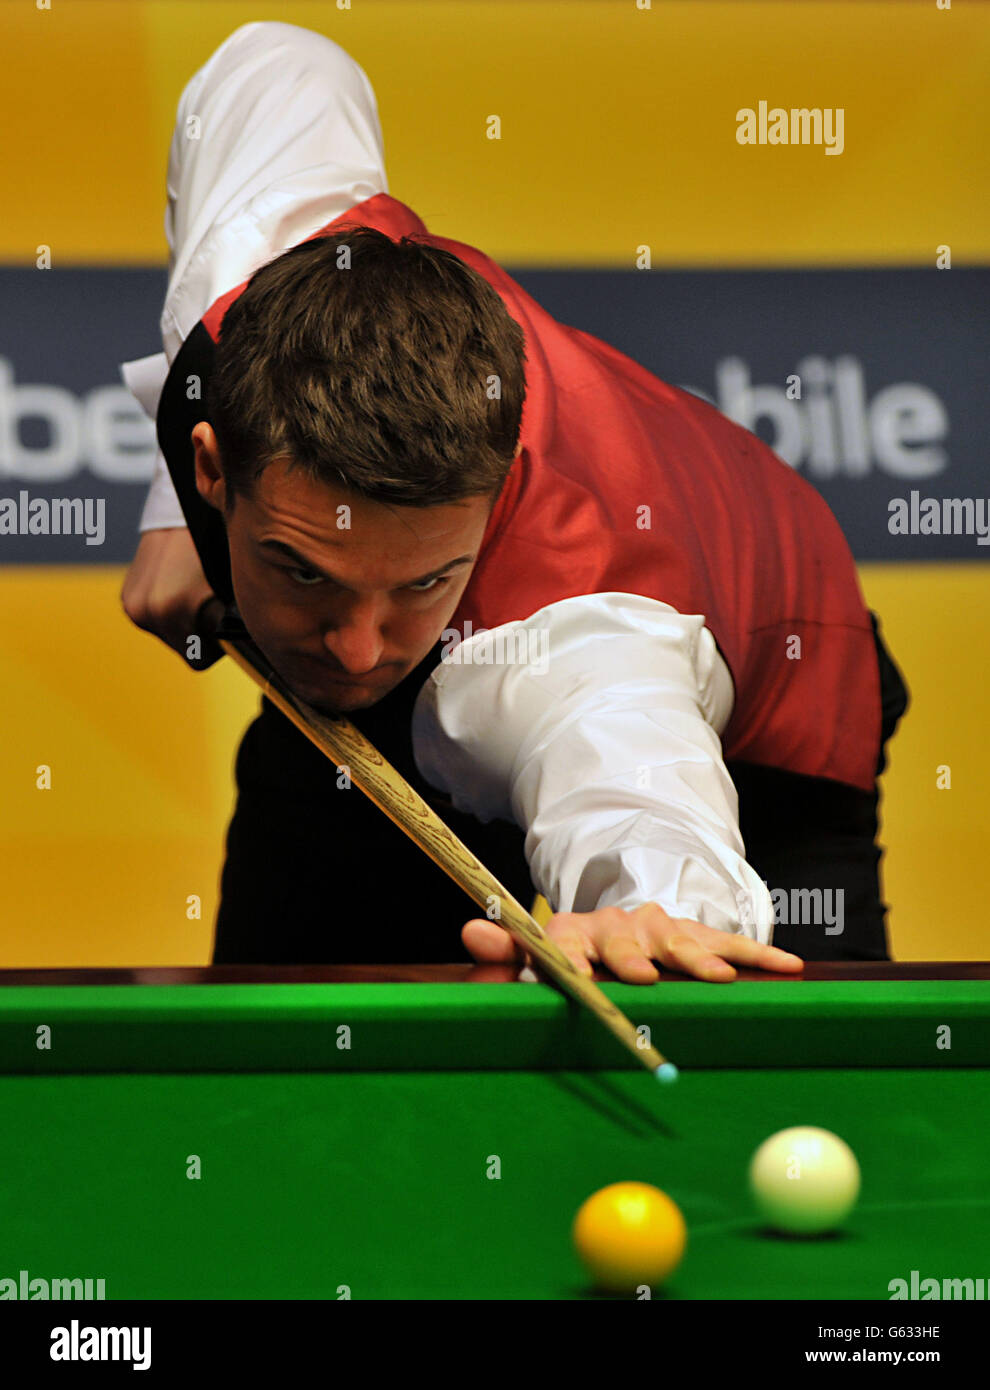 Michael Holt in action during his first round match against Ricky Walden during the Betfair World Championships at the Crucible, Sheffield. Stock Photo